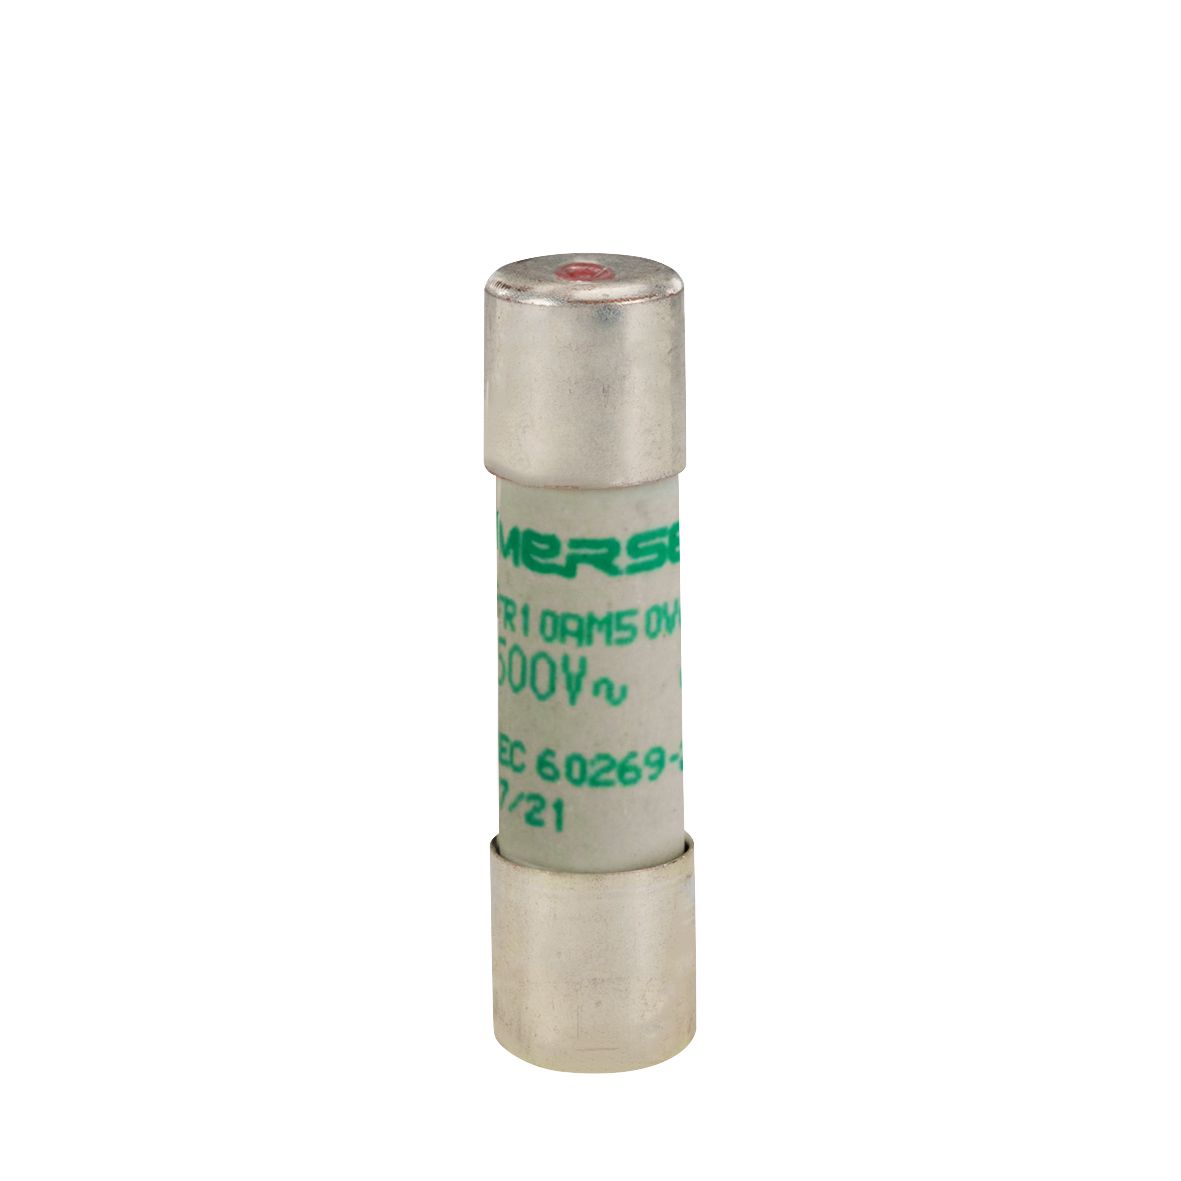 P215132 - Cylindrical fuse-link aM 500VAC 10.3x38, 16A with indicator